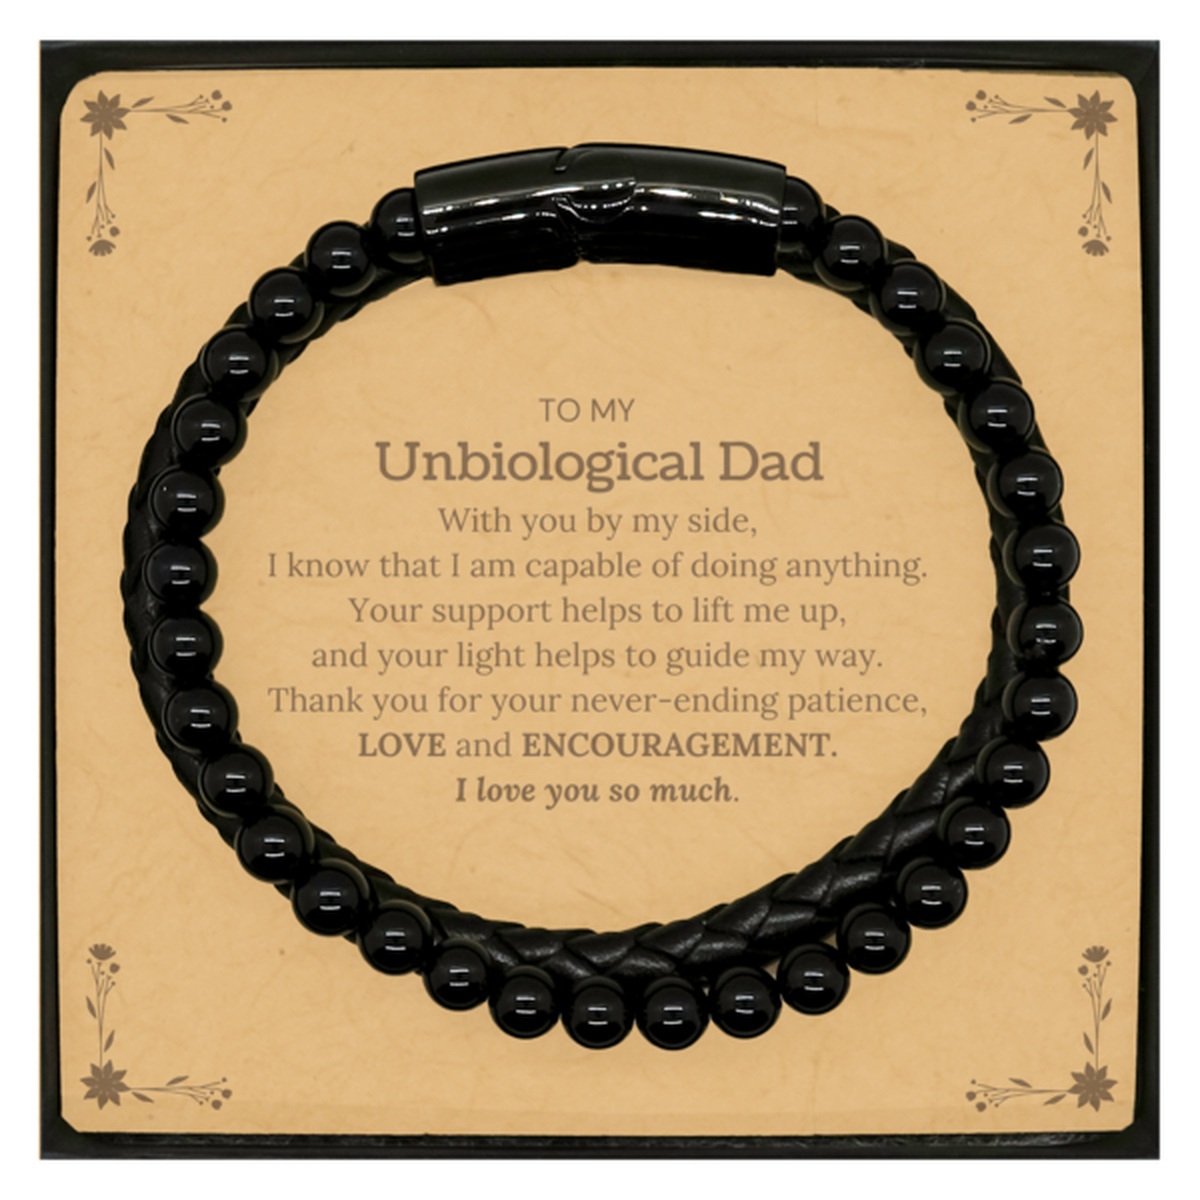 Appreciation Unbiological Dad Stone Leather Bracelets Gifts, To My Unbiological Dad Birthday Christmas Wedding Keepsake Gifts for Unbiological Dad With you by my side, I know that I am capable of doing anything. I love you so much